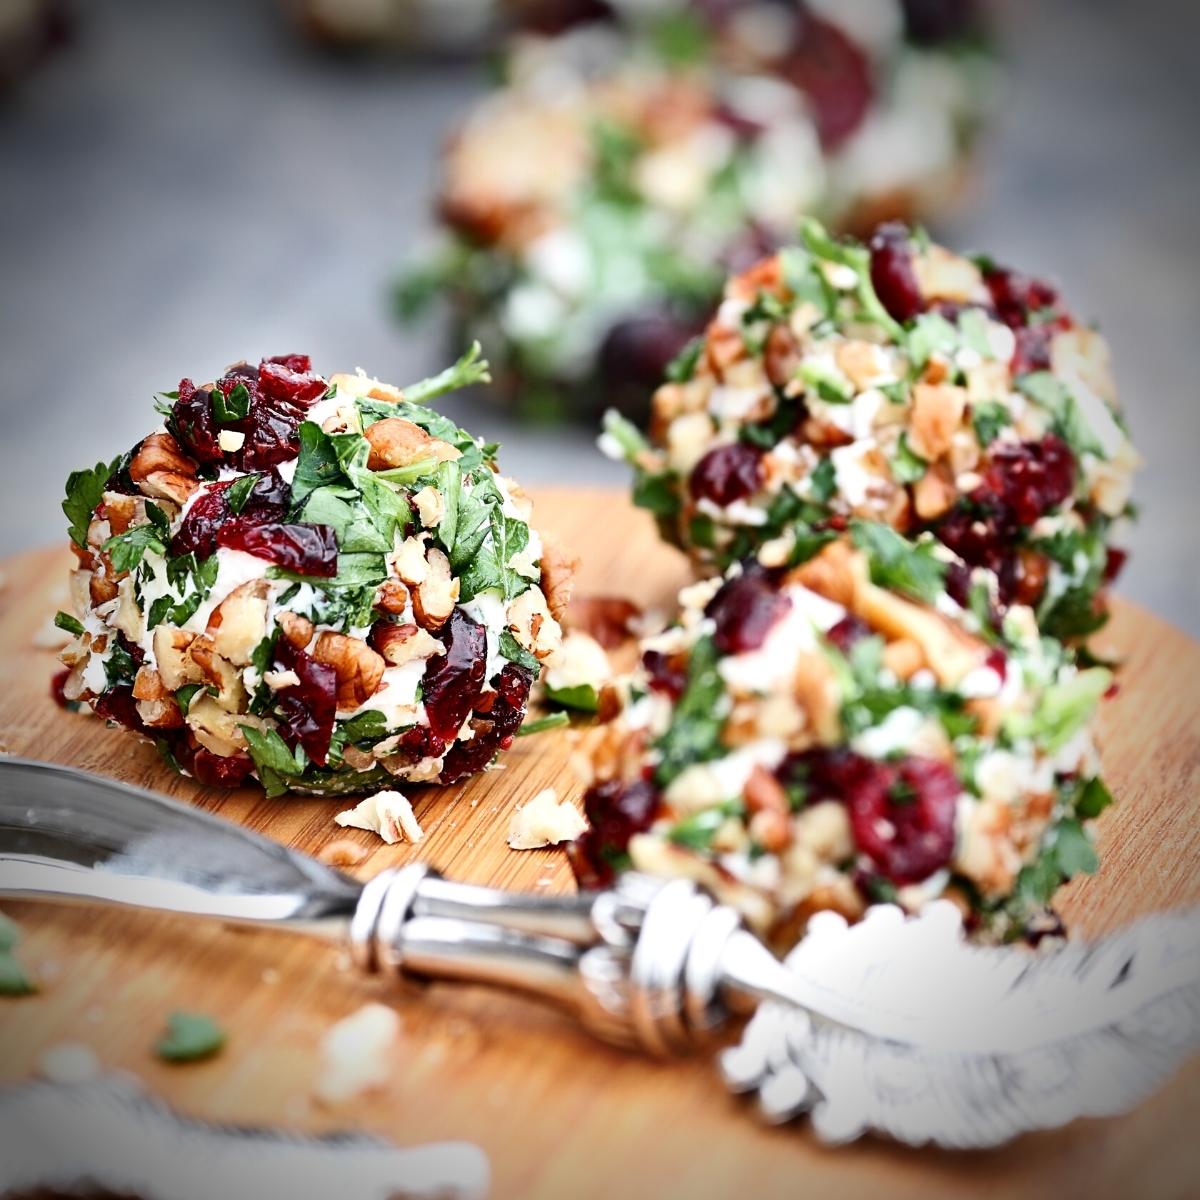 Colorful dried cranberry and parsley coated cheeseballs on a wooden platter.